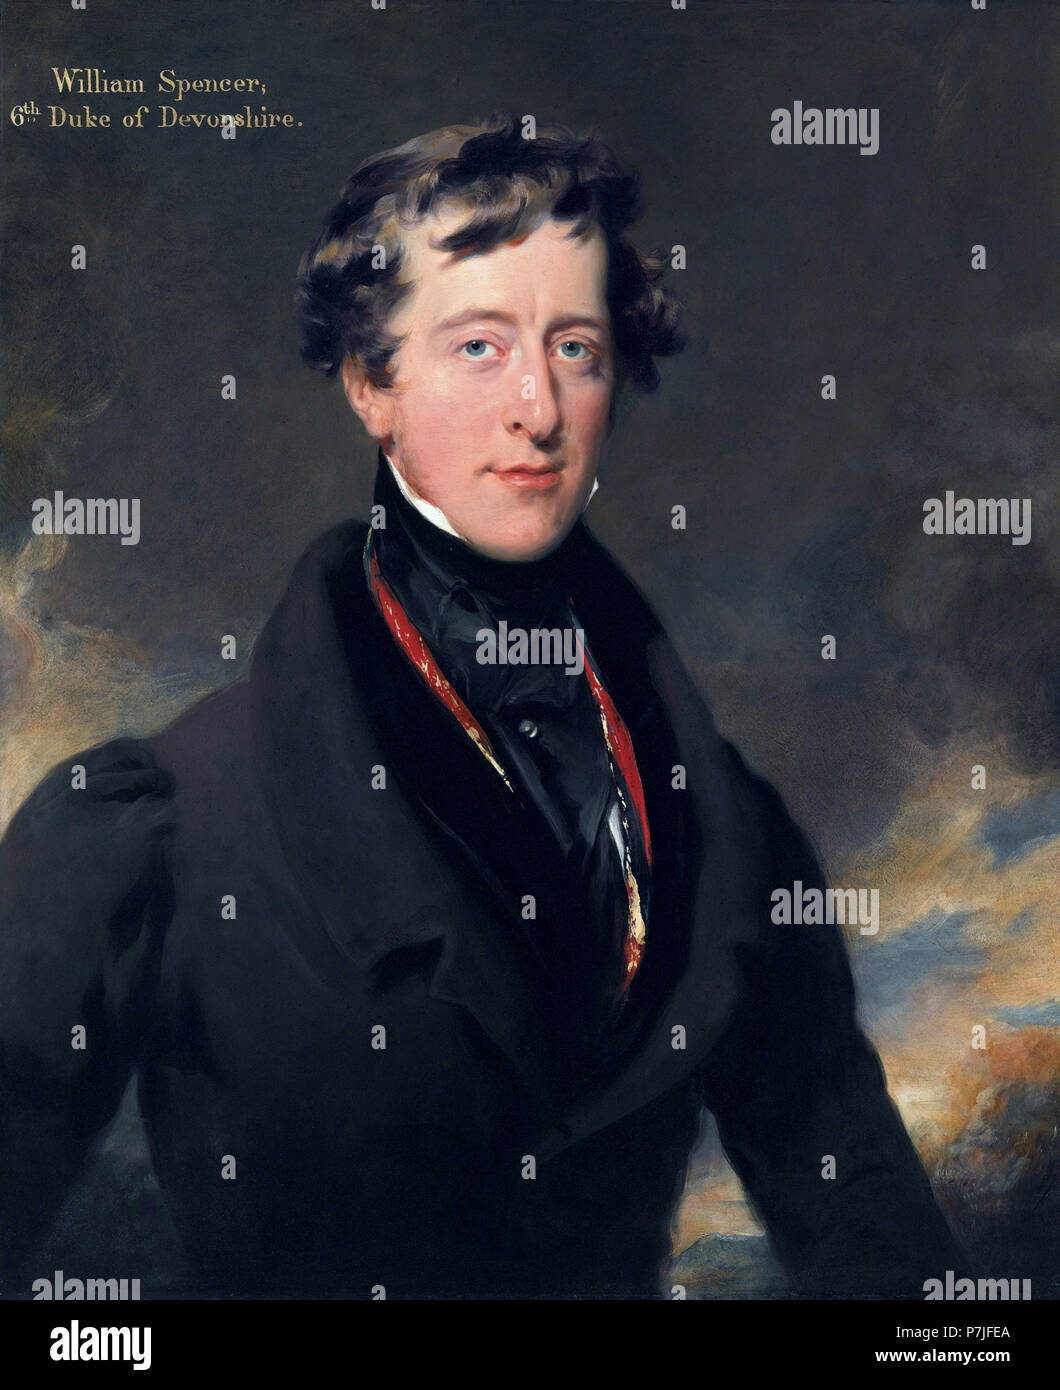 William Spencer Cavendish, 6th Duke of Devonshire (1790-1858). Painting by Thomas Lawrence  William George Spencer Cavendish, 6th Duke of Devonshire, Marquess of Hartington, British peer, nobleman, and Whig politician. The Cavendish banana is named after him. Stock Photo